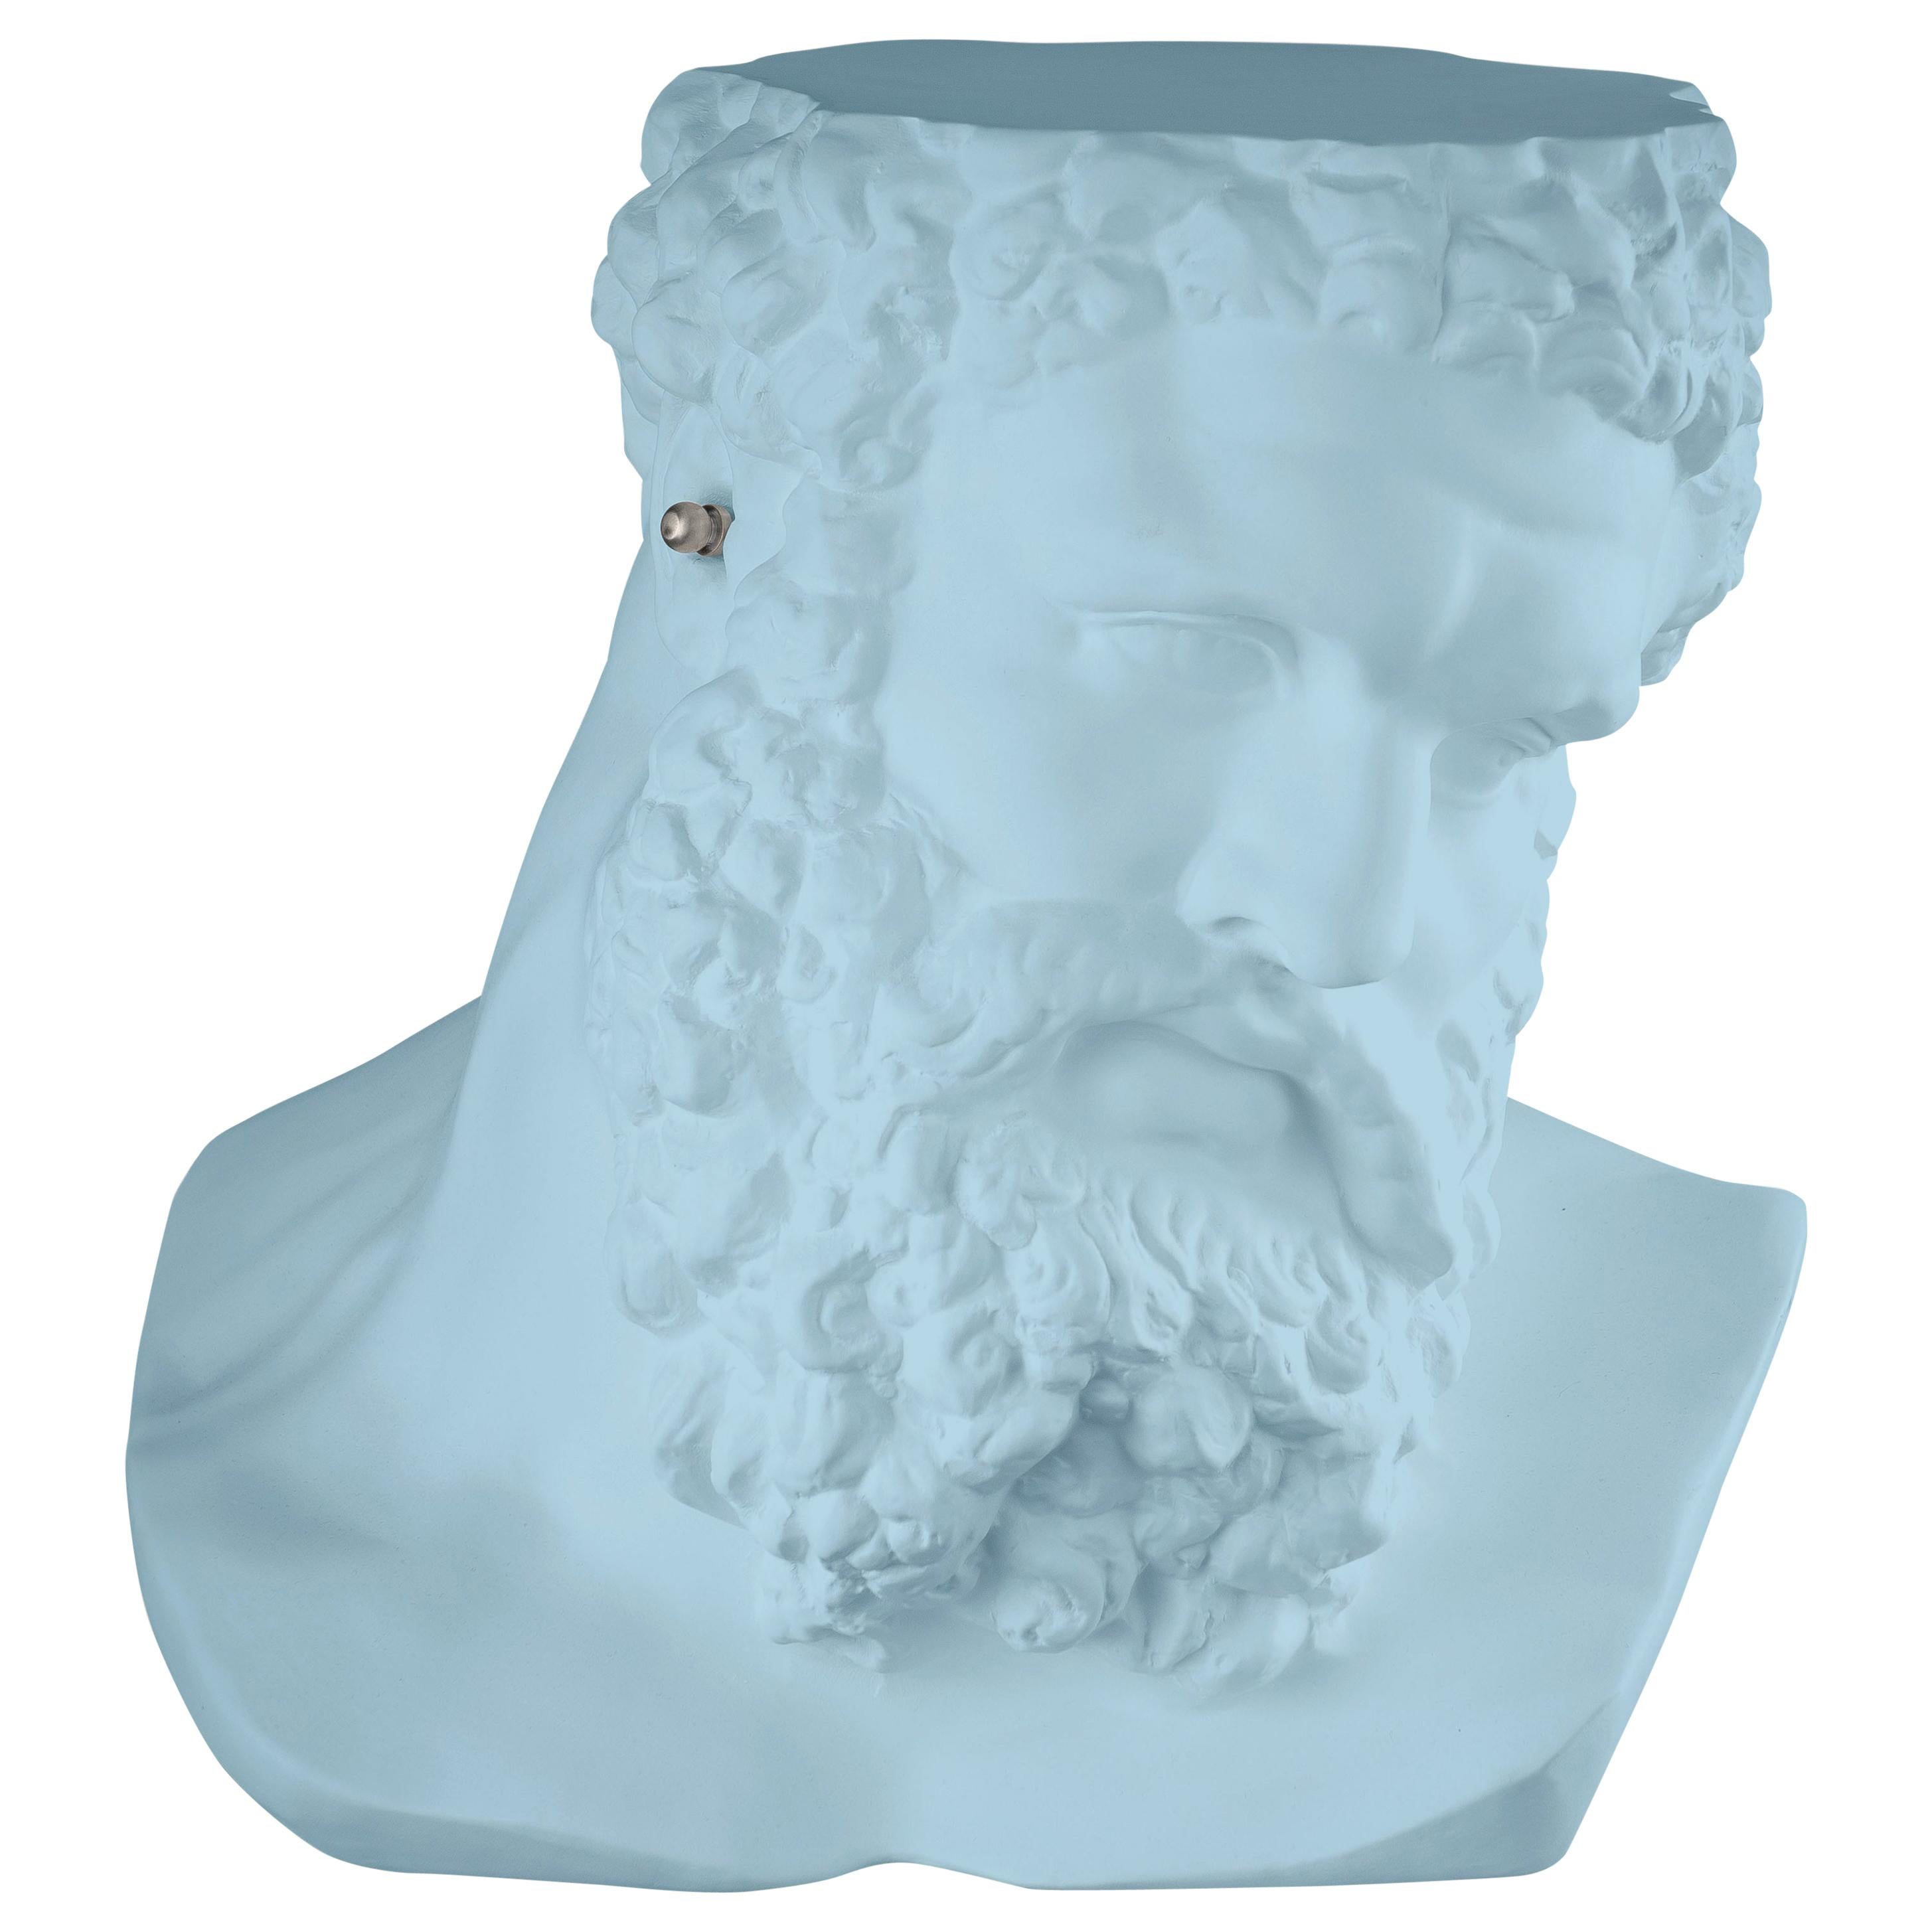 Bust Ercole"Don't Hear", Small Table/Sculpture, Ceramic, Purist Blue Color Italy For Sale